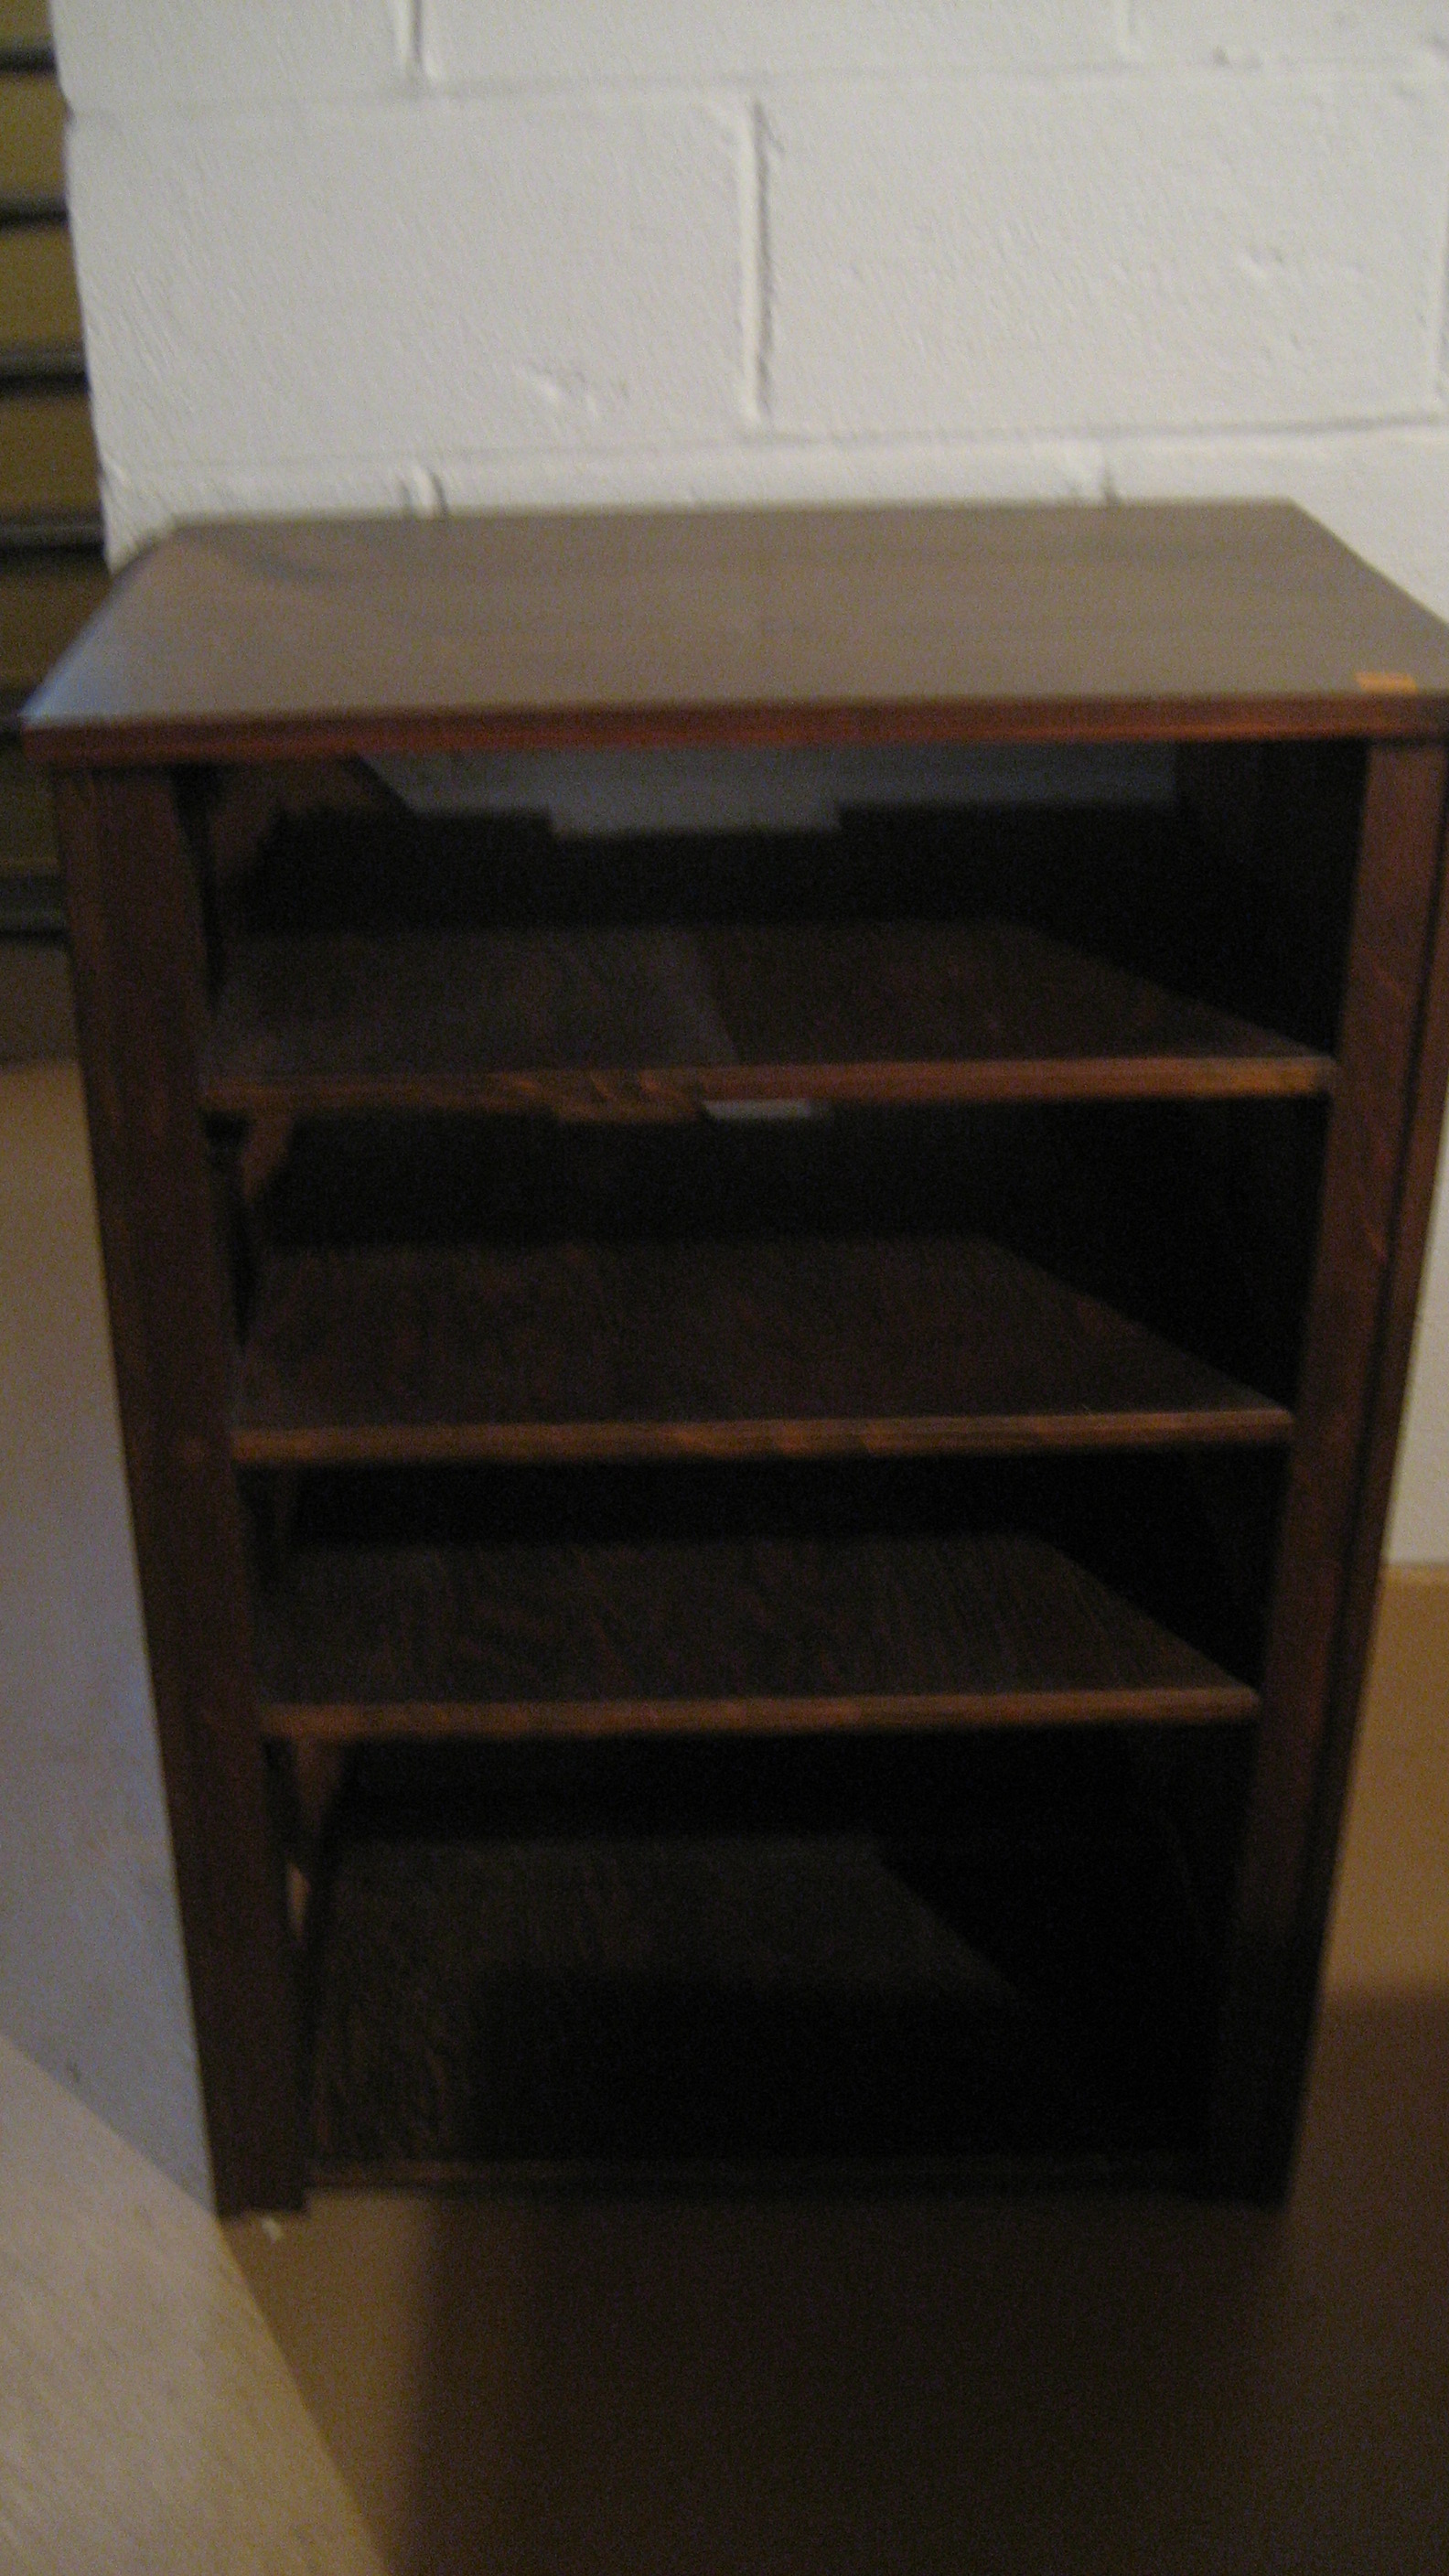 Wood Stereo Cabinet Shelving Unit